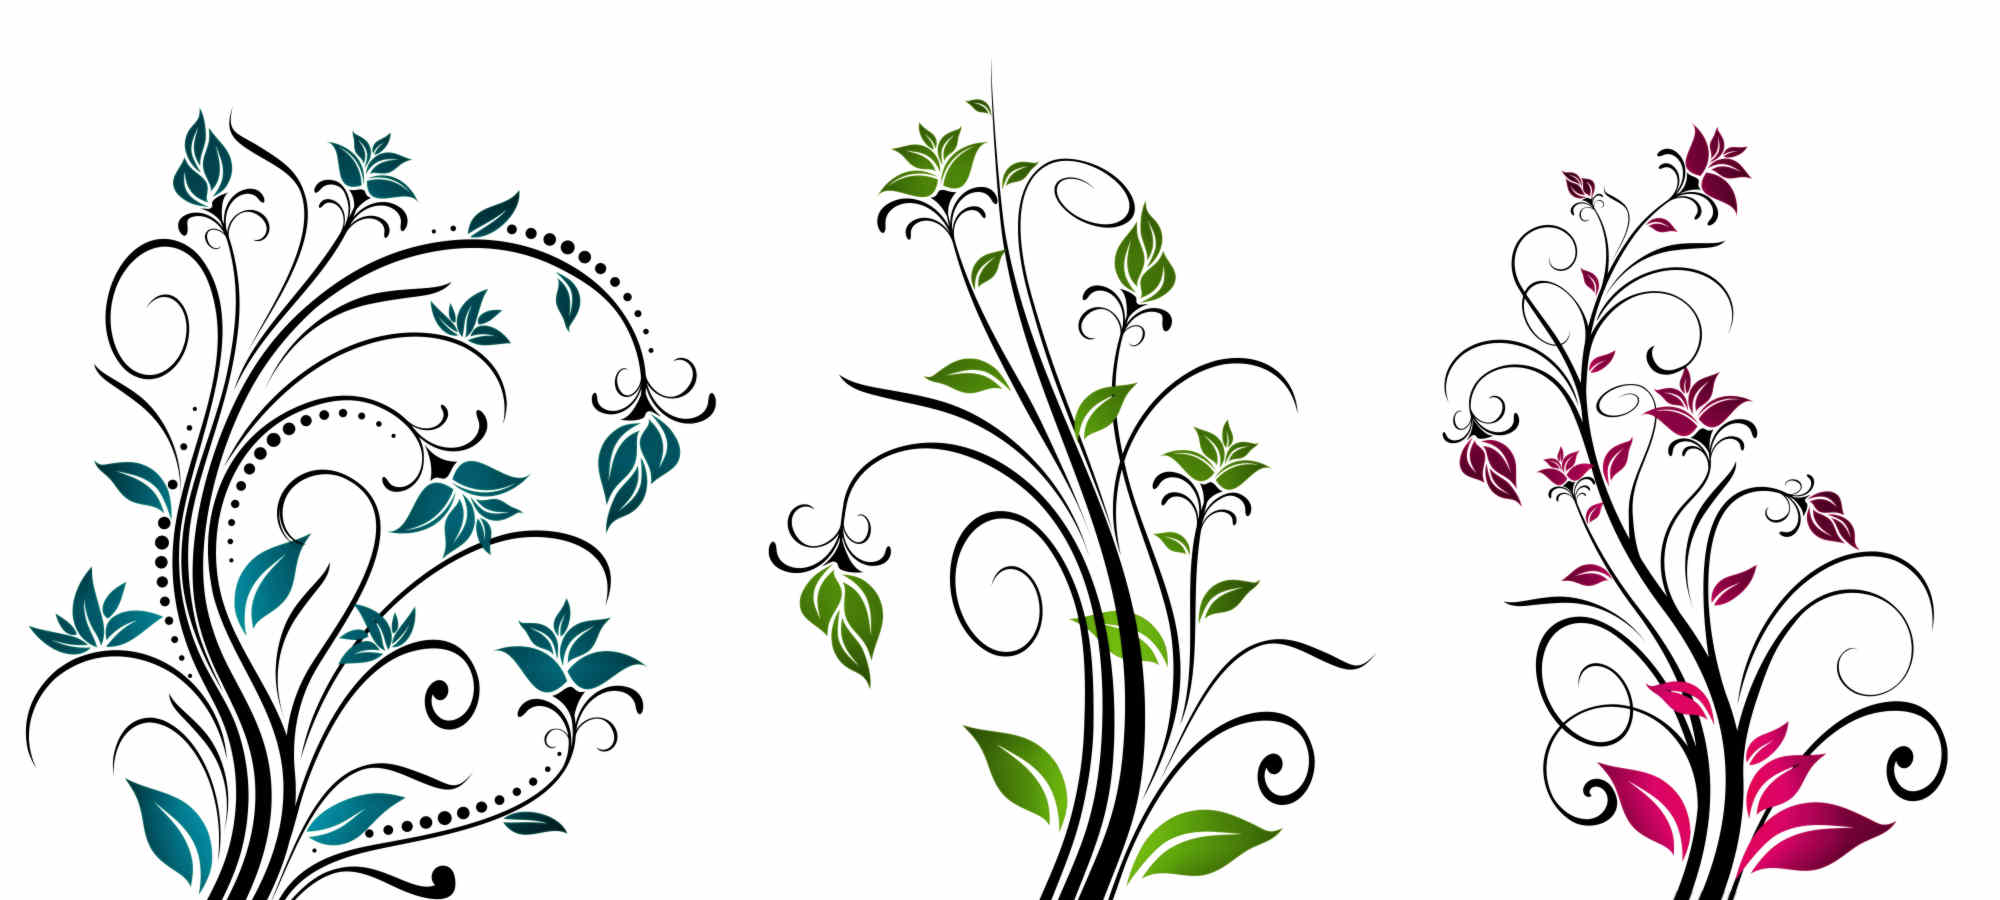 Free Vector Cliparts, Download Free Vector Cliparts png images, Free